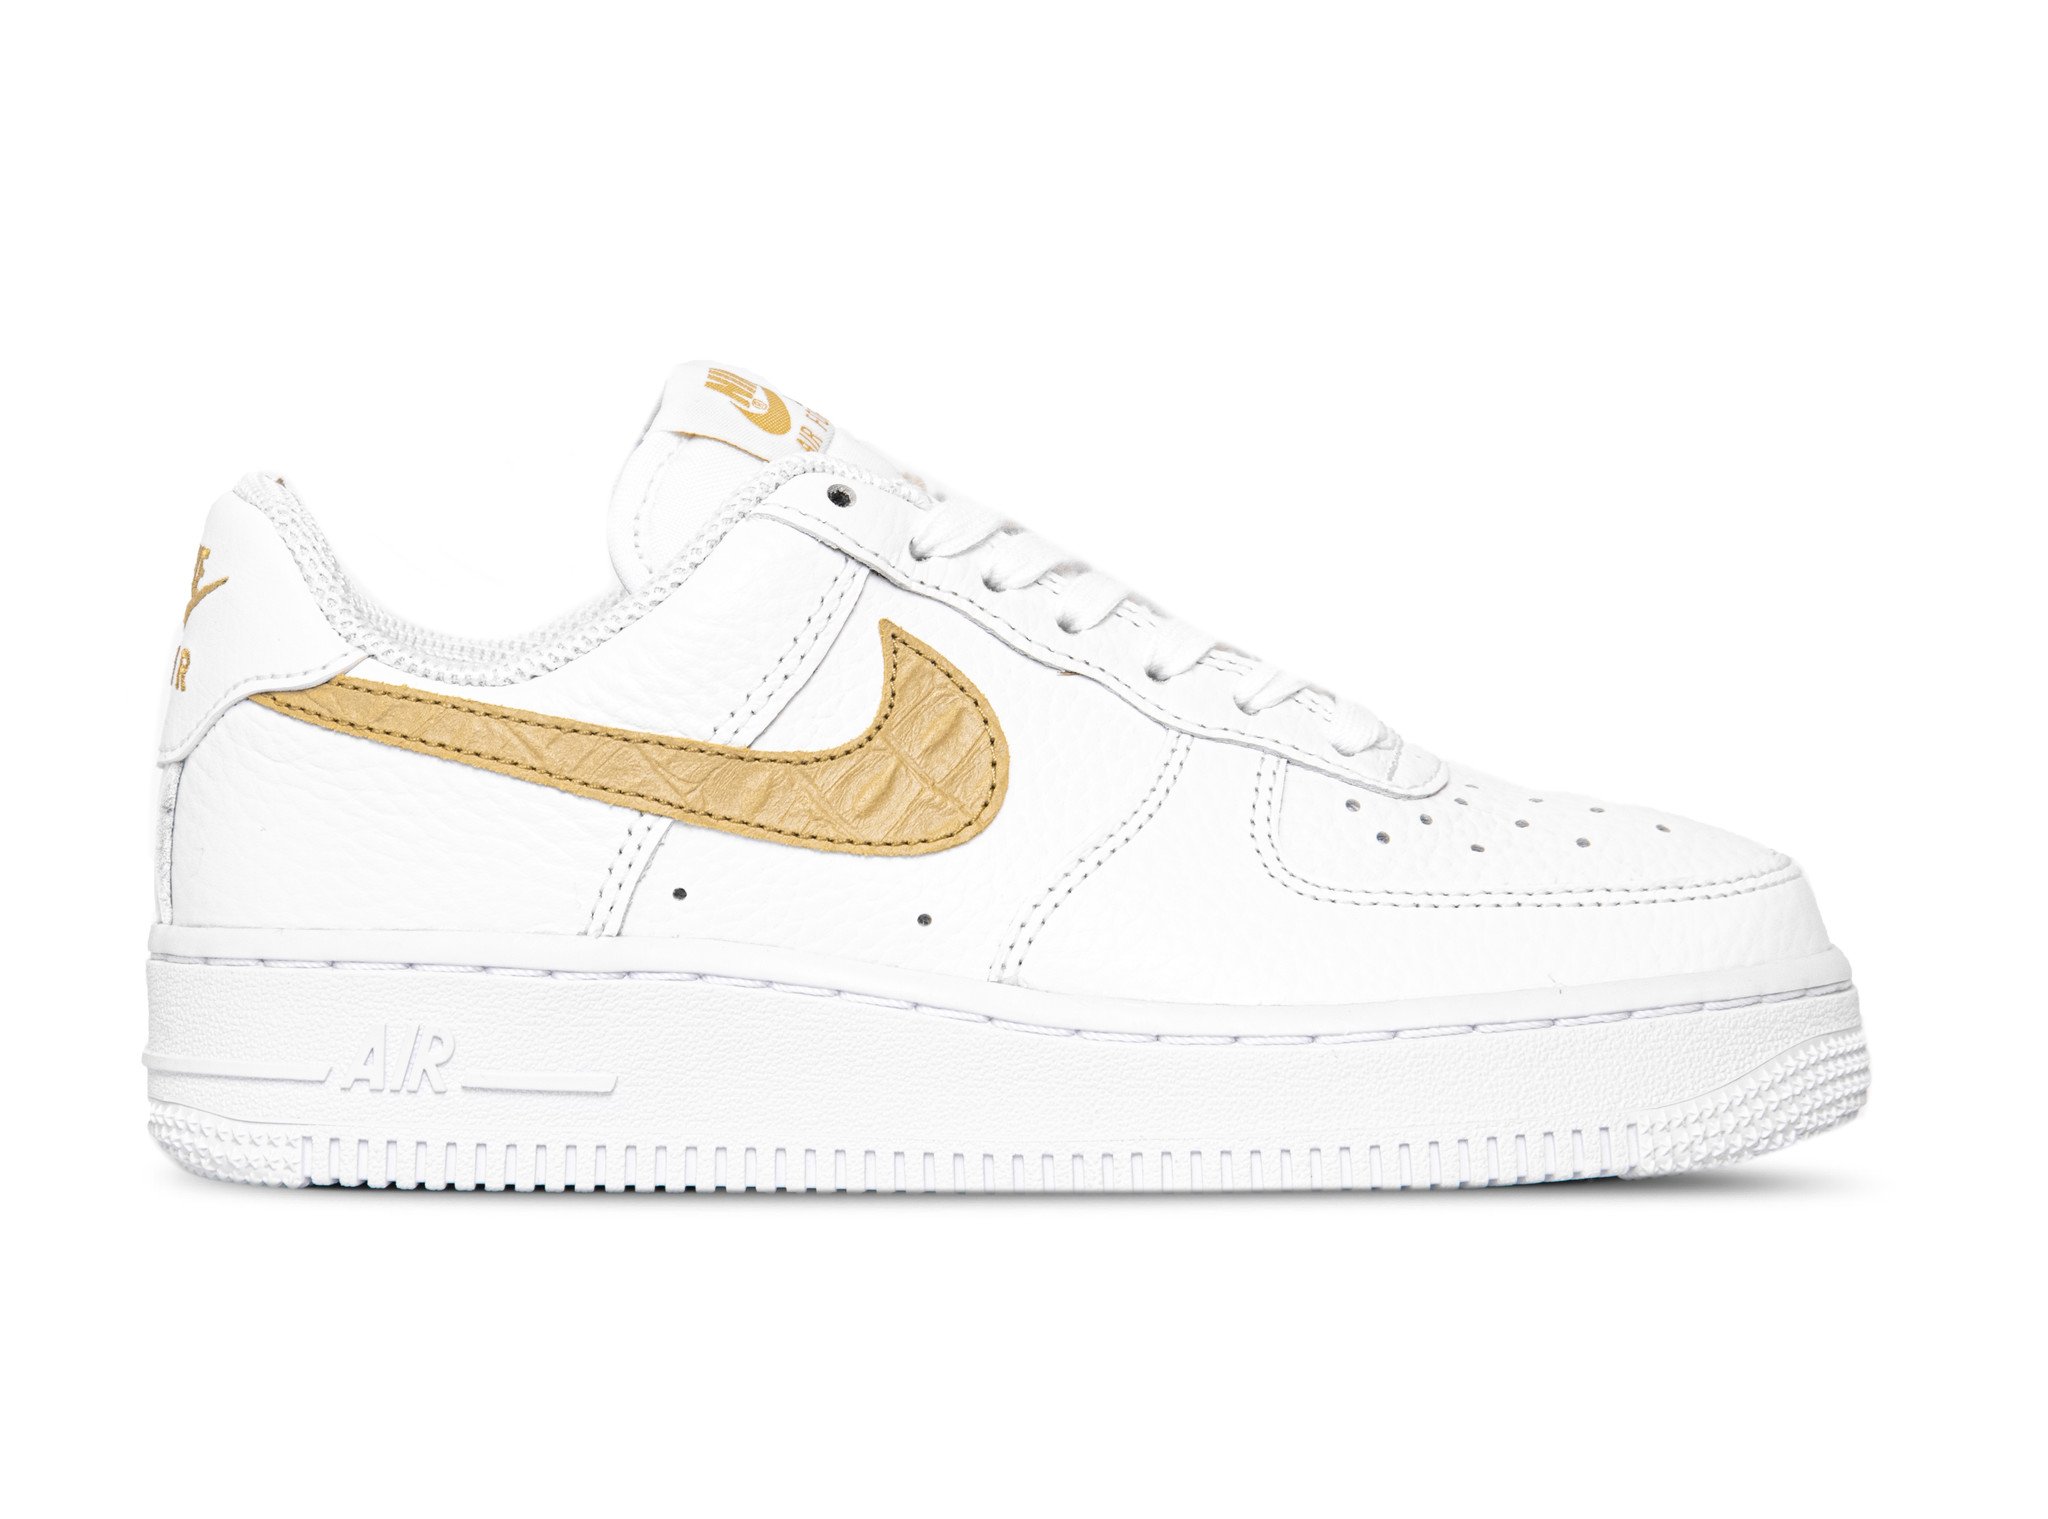 nike air force 1 lv8 gold